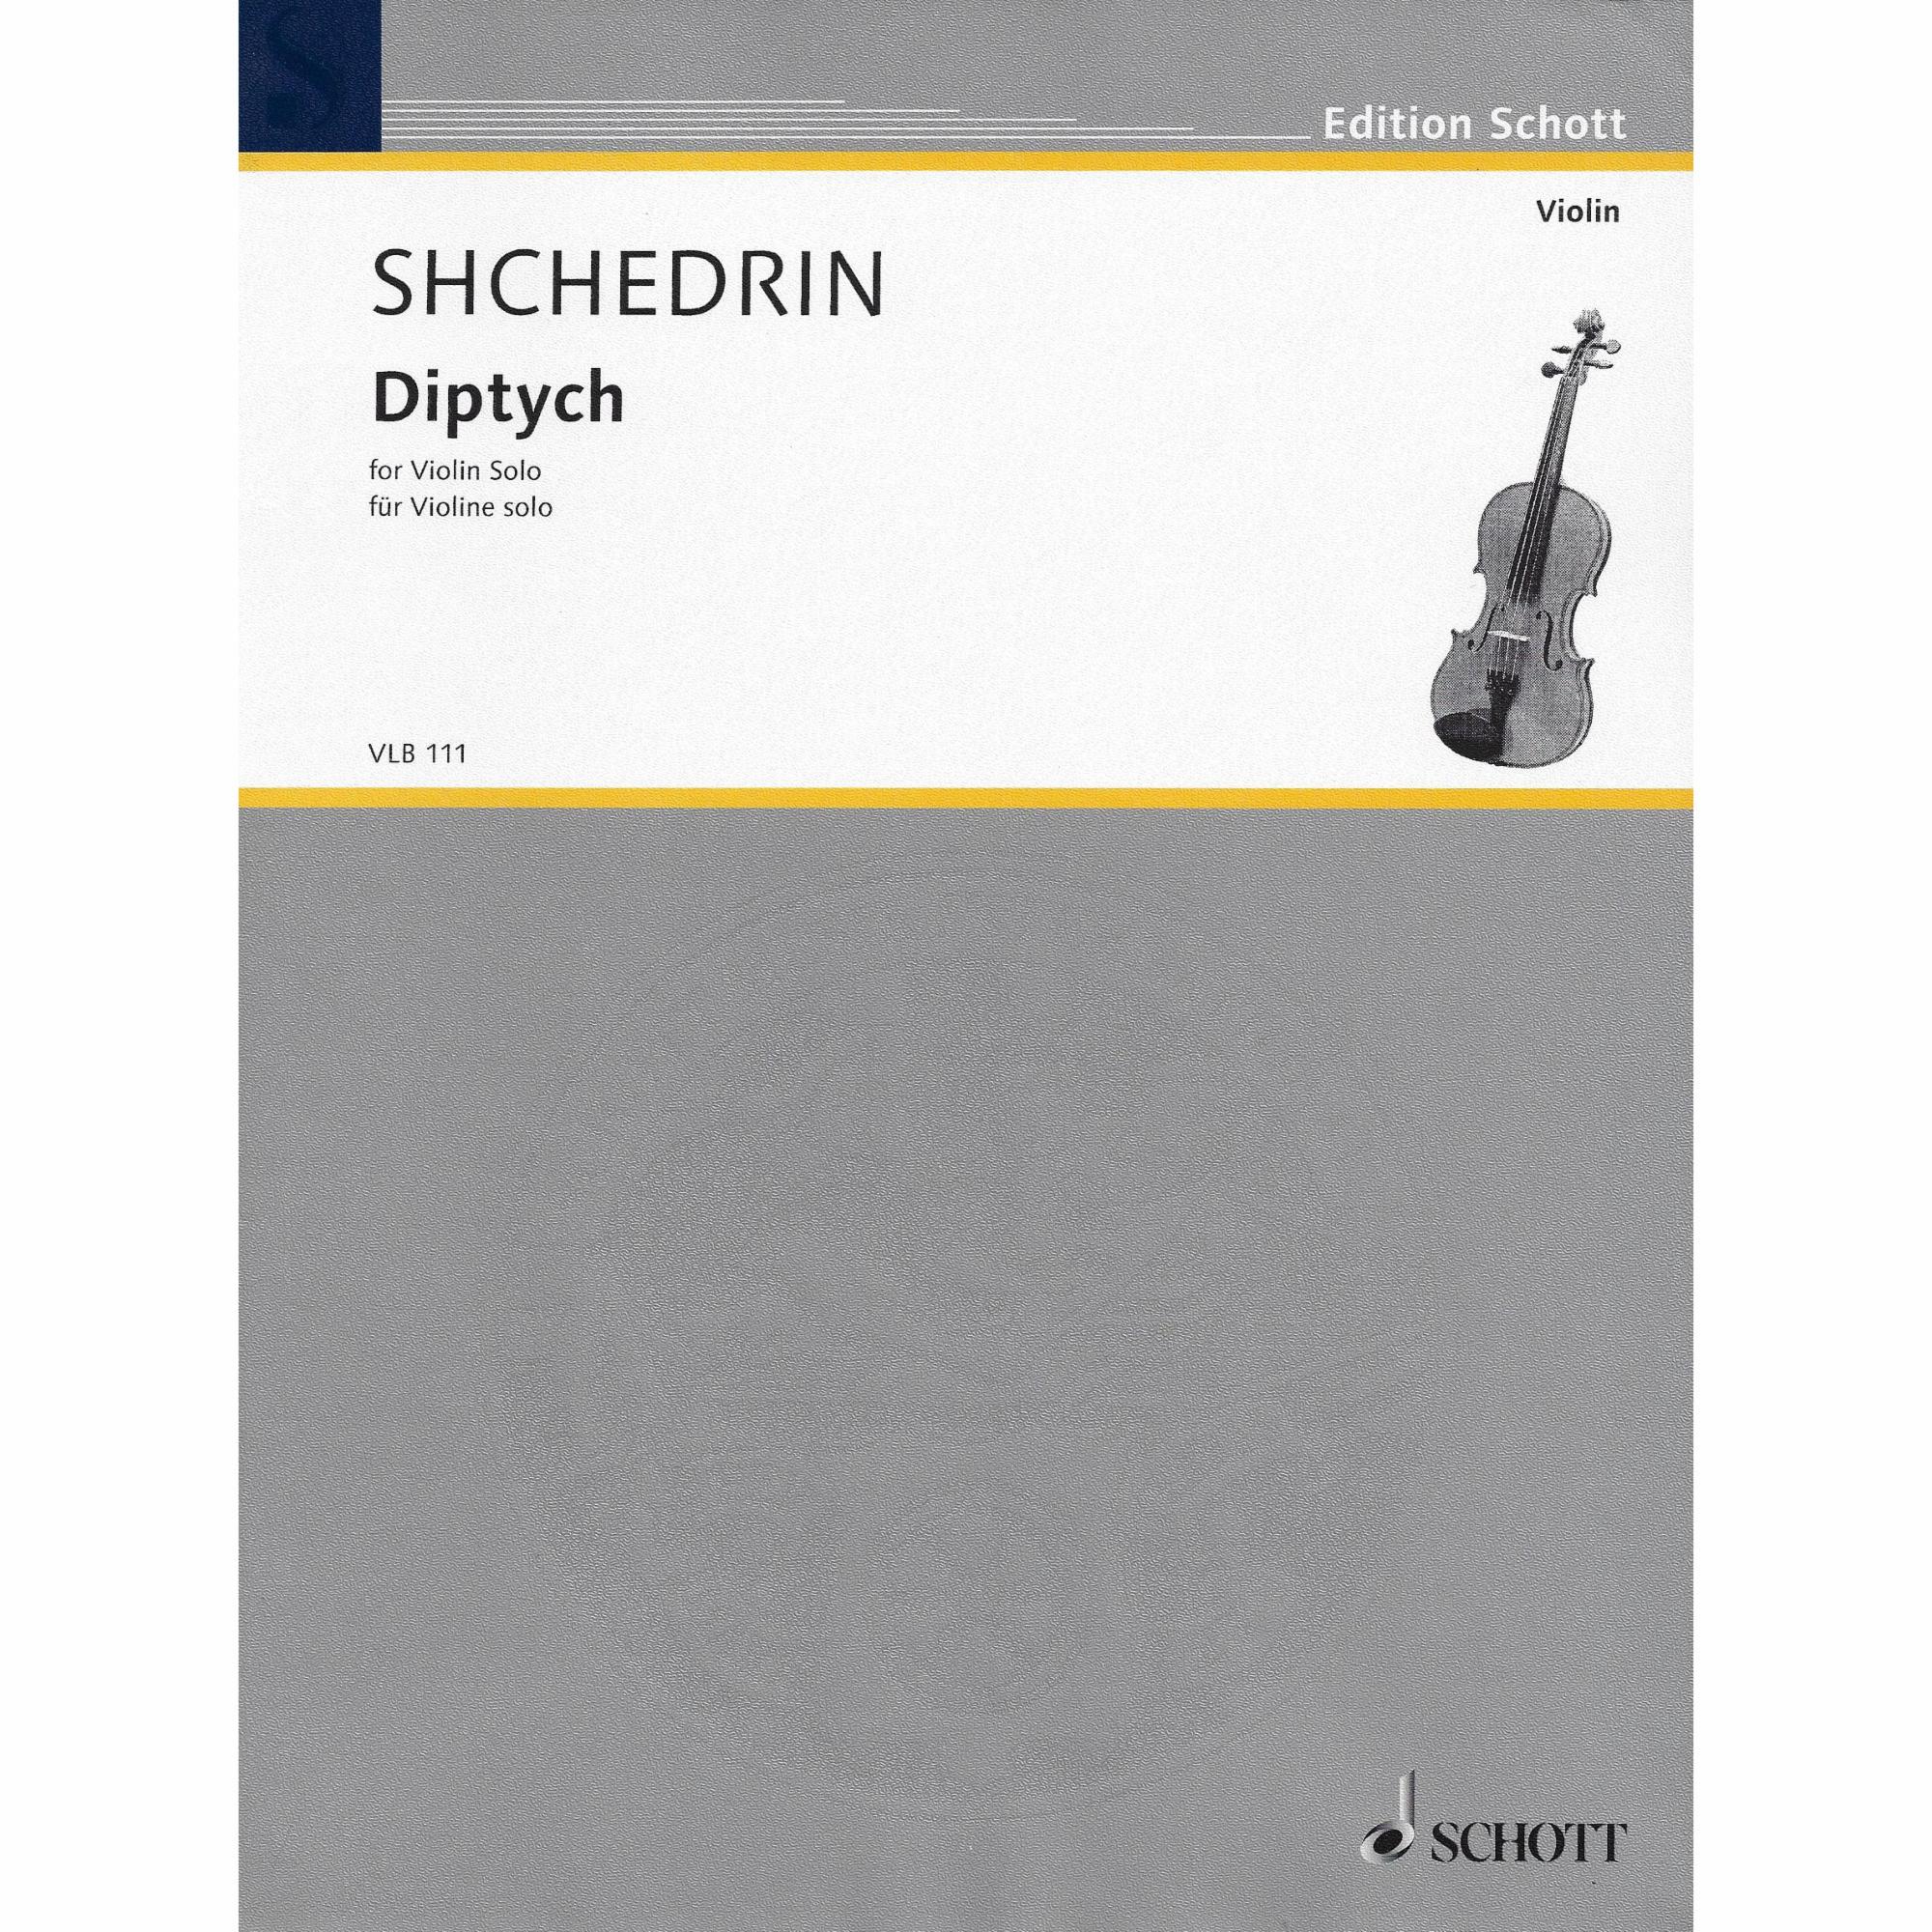 Shchedrin -- Diptych for Solo Violin